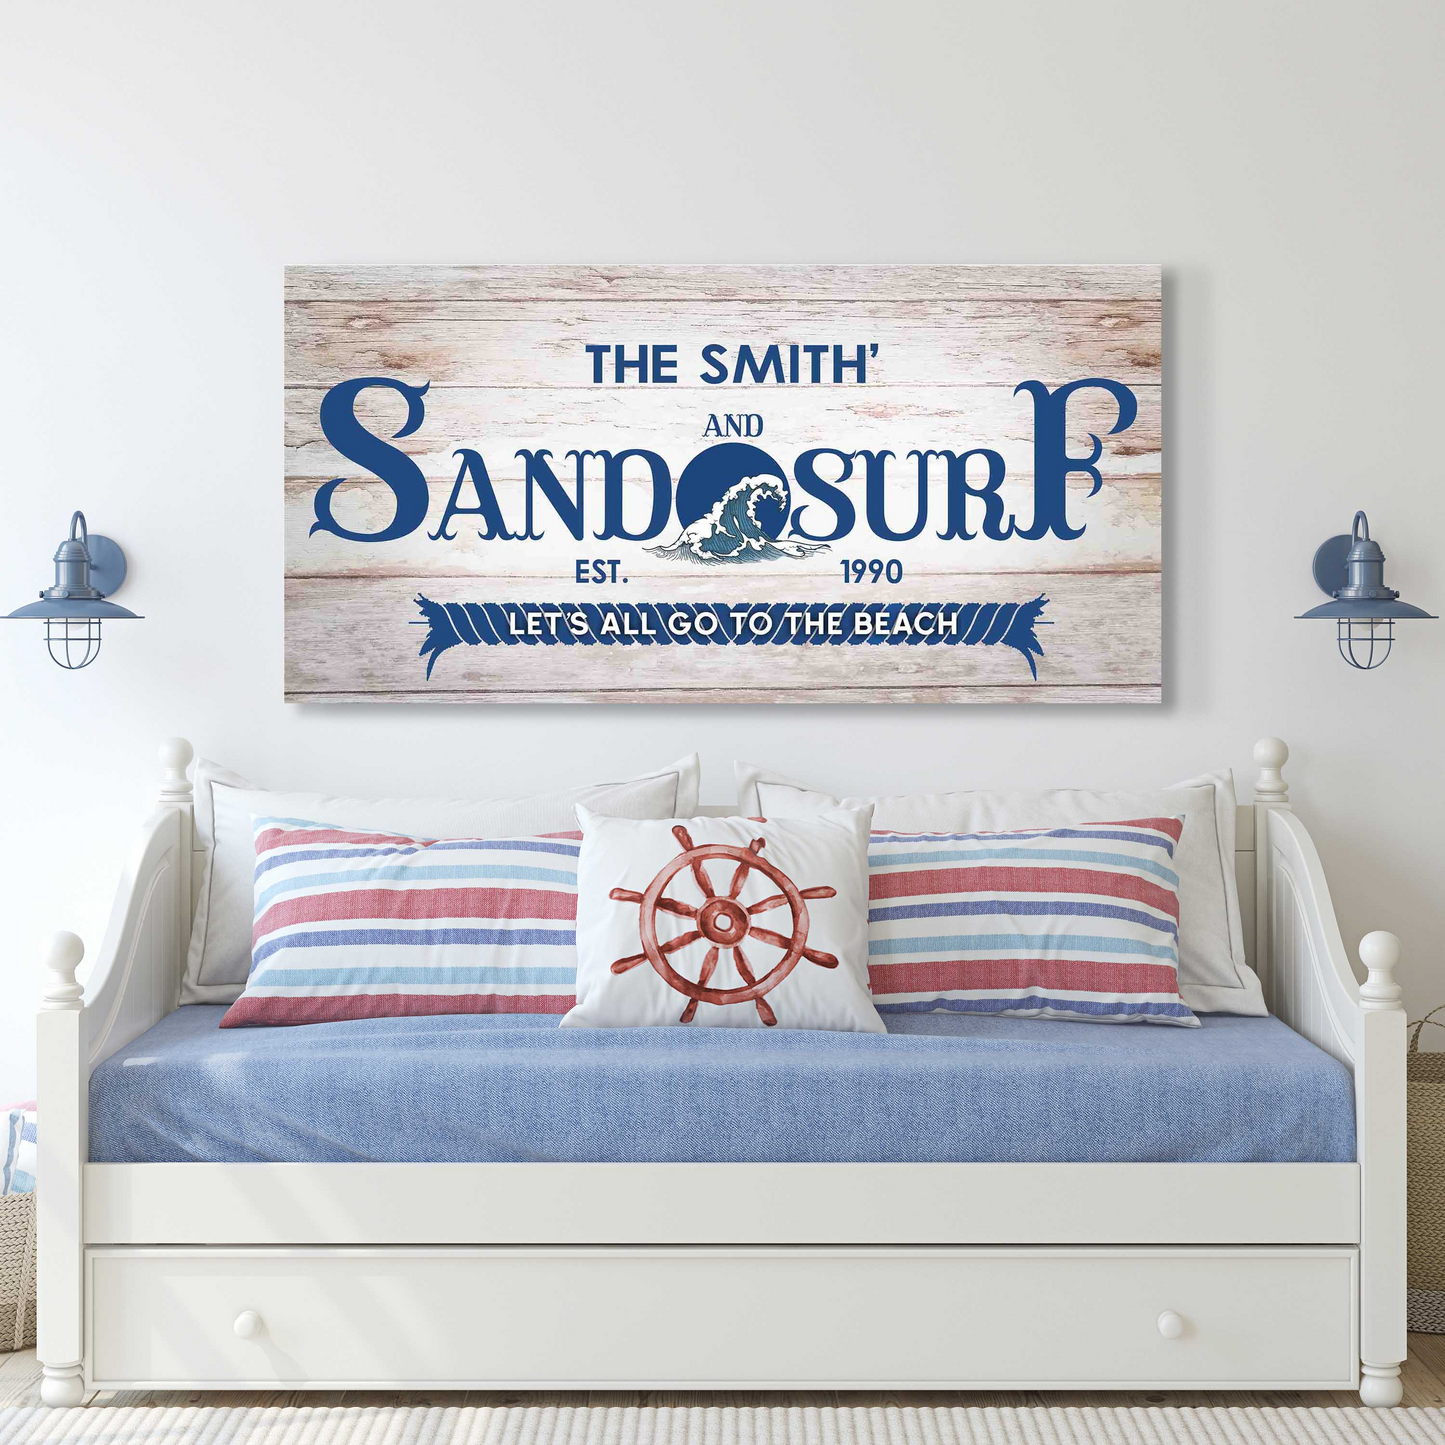 Sand and Surf Sign III - Image by Tailored Canvases